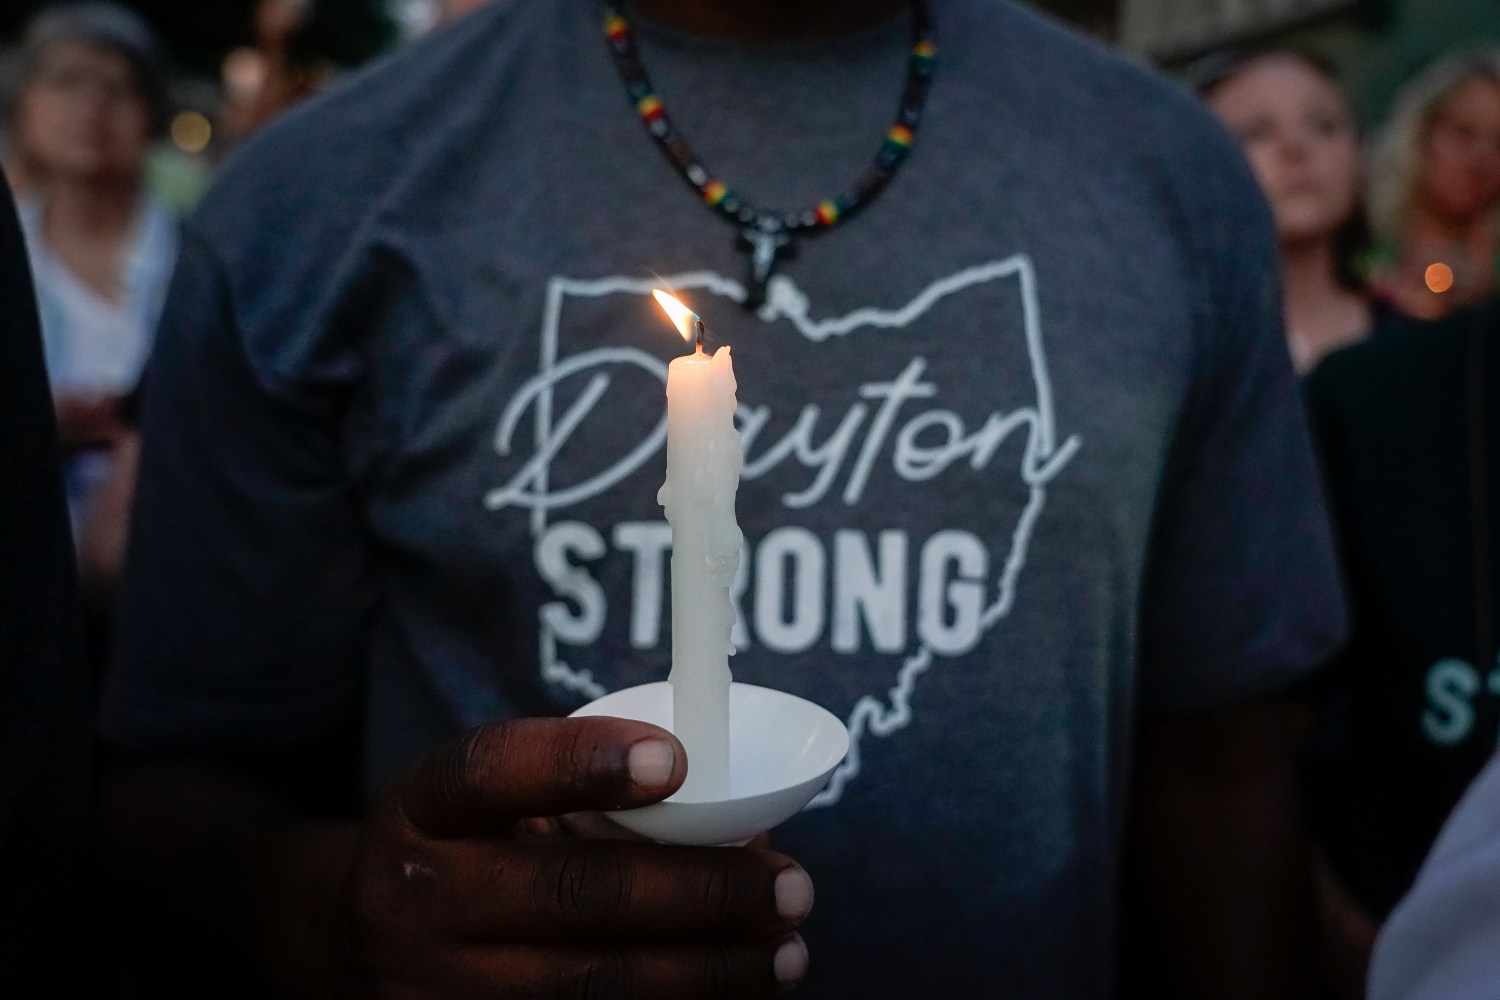 A mourner holds a candle during a vigil at scene of a mass shooting in Dayton